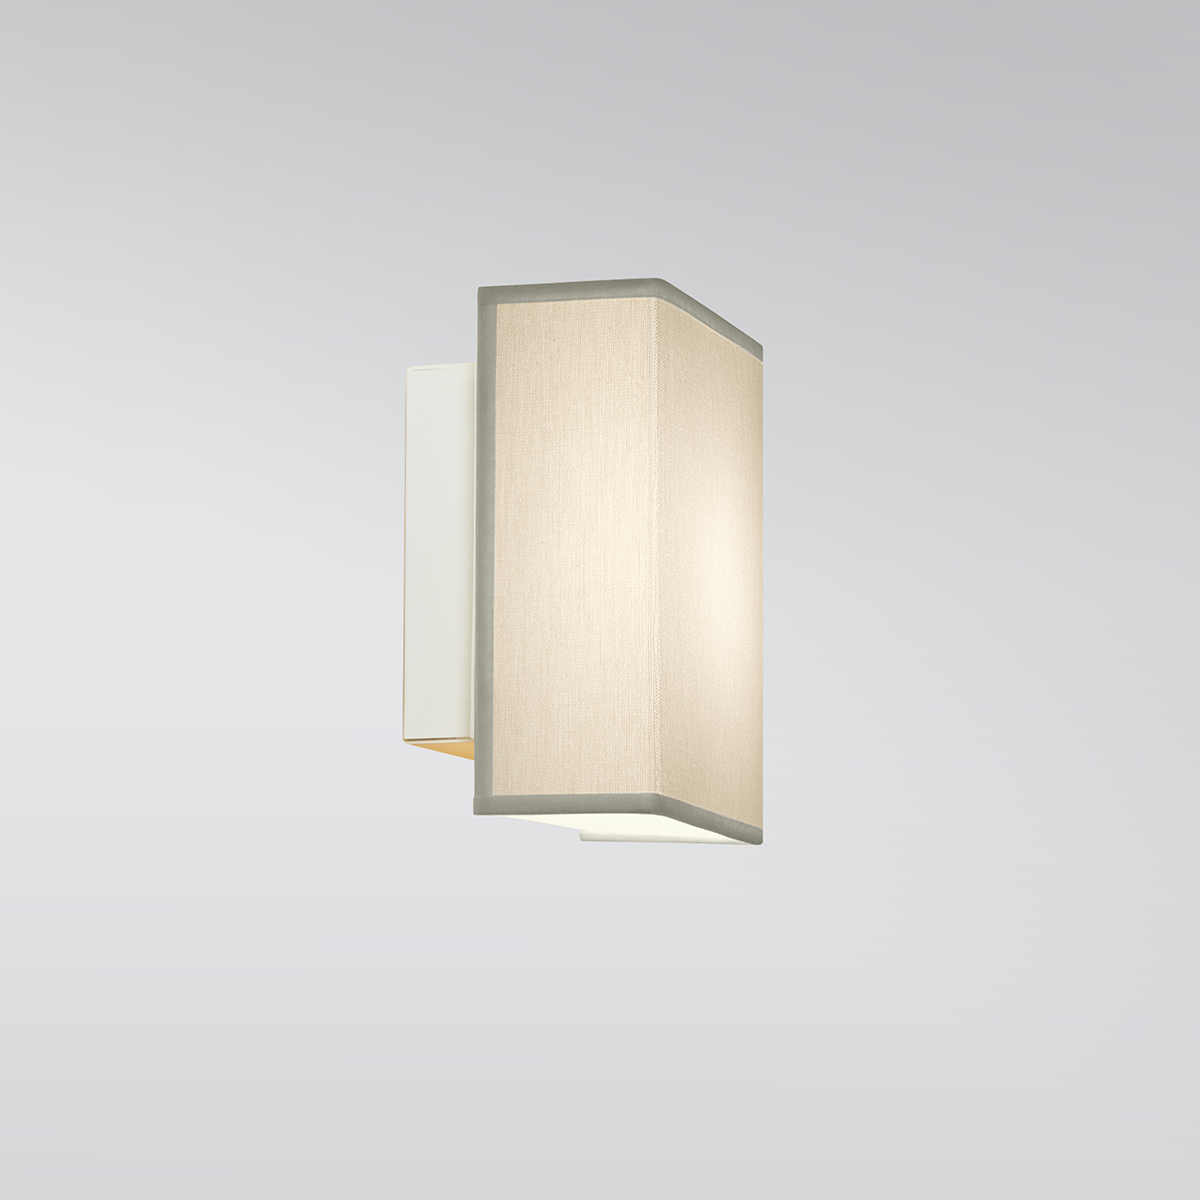 A small rectangular wall sconce with a fabric-looking shade